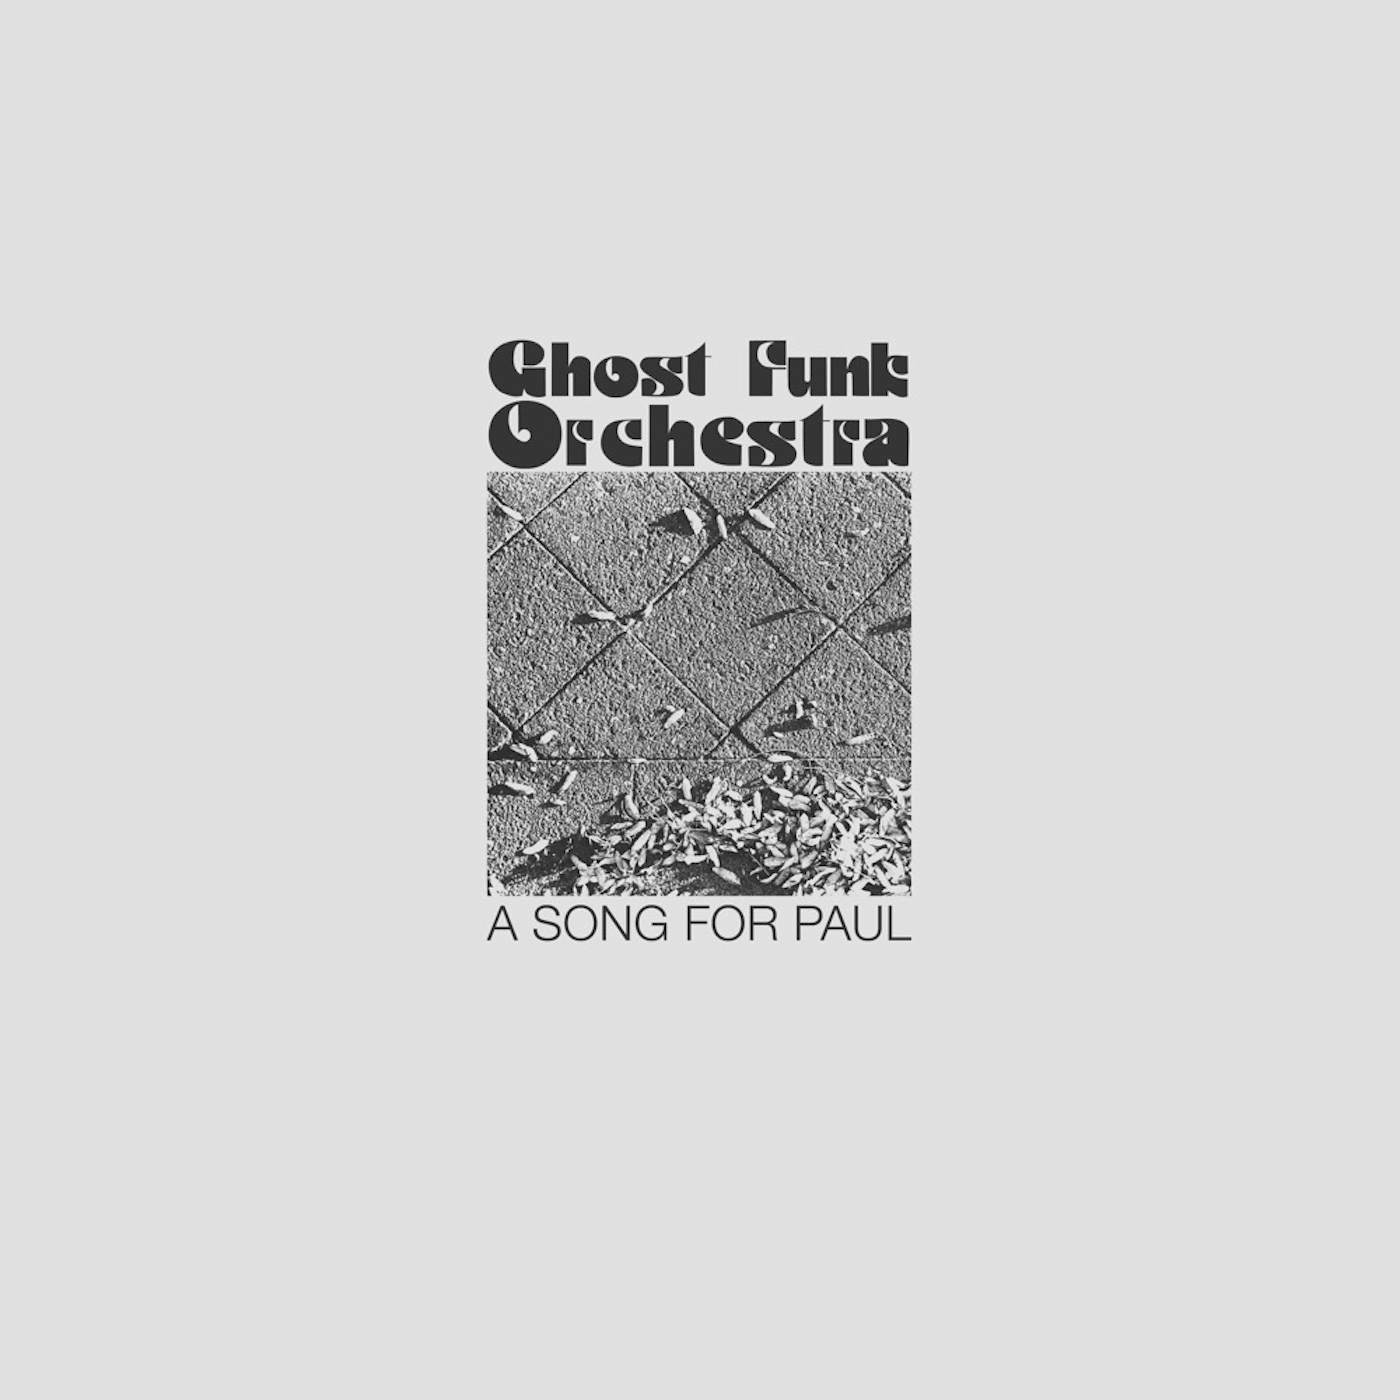 Ghost Funk Orchestra SONG FOR PAUL CD